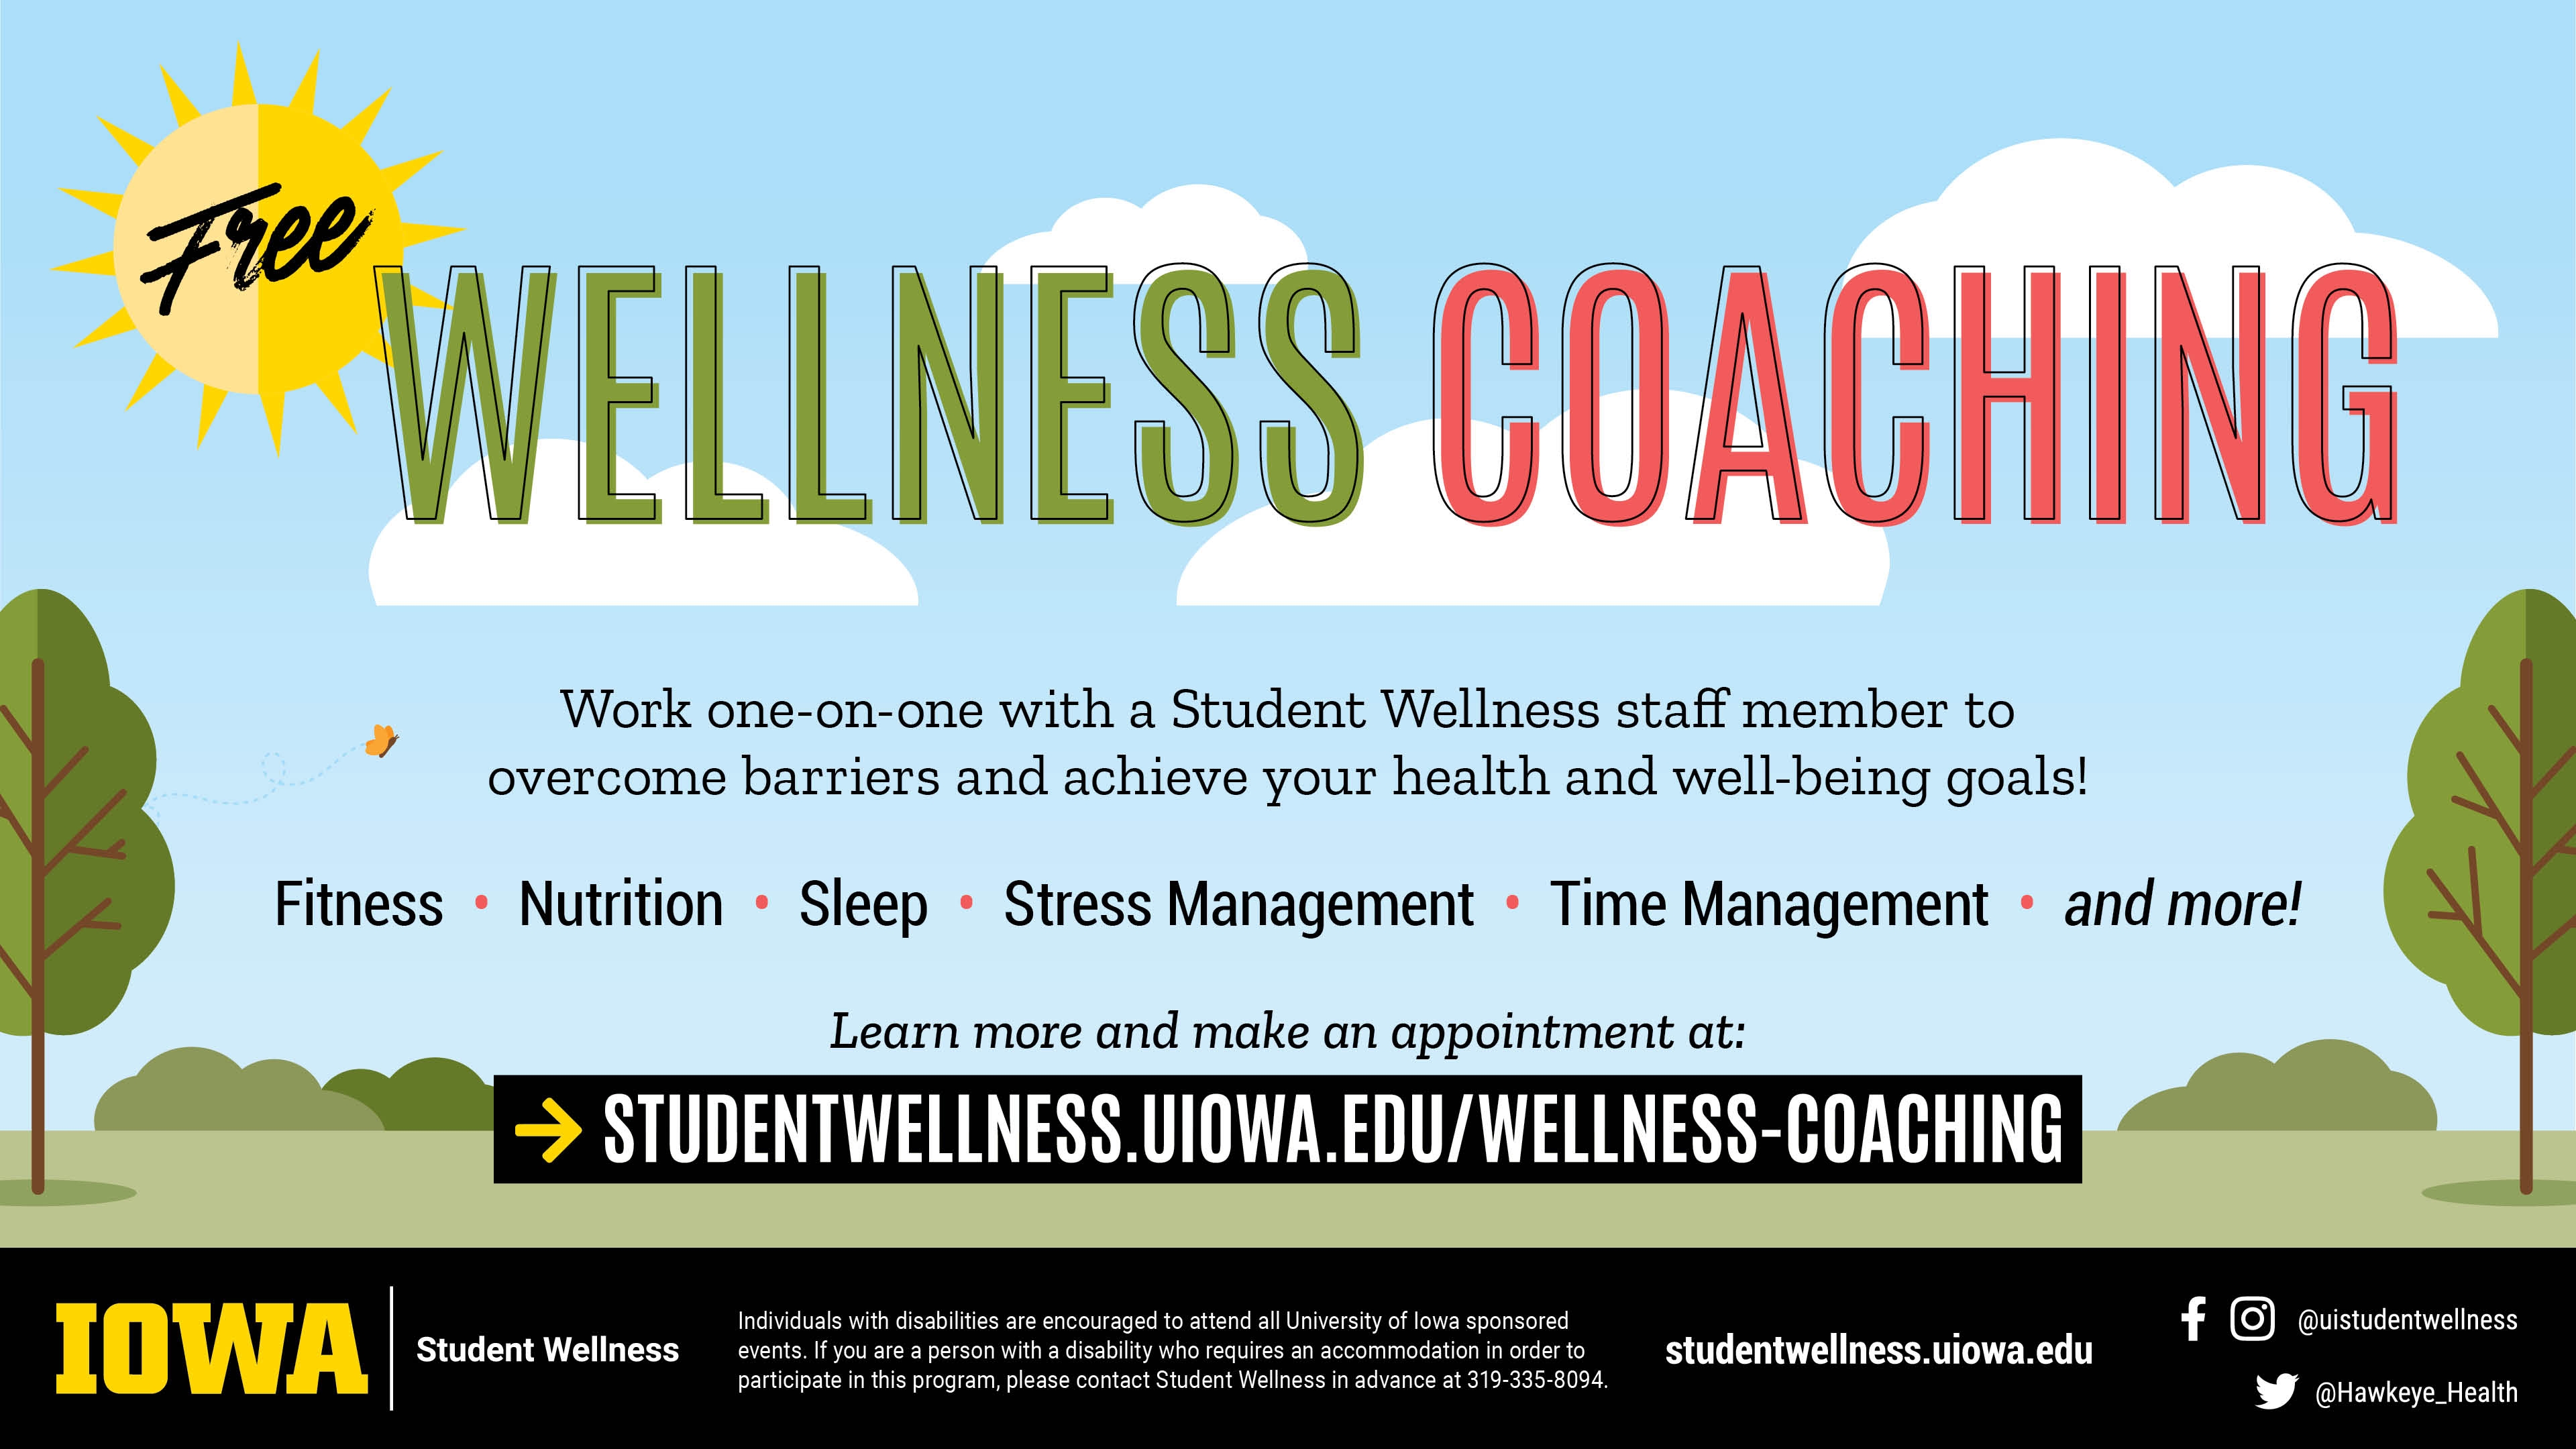 Free Wellness Coaching. Work one-on-one with a Student Wellness staff member to overcome barriers and achieve your health and well-being goals! Fitness | Nutrition | Sleep | Stress Management | Time Management | and more! Learn more and make an appointment at: studentwellness.uiowa.edu/wellness-coaching